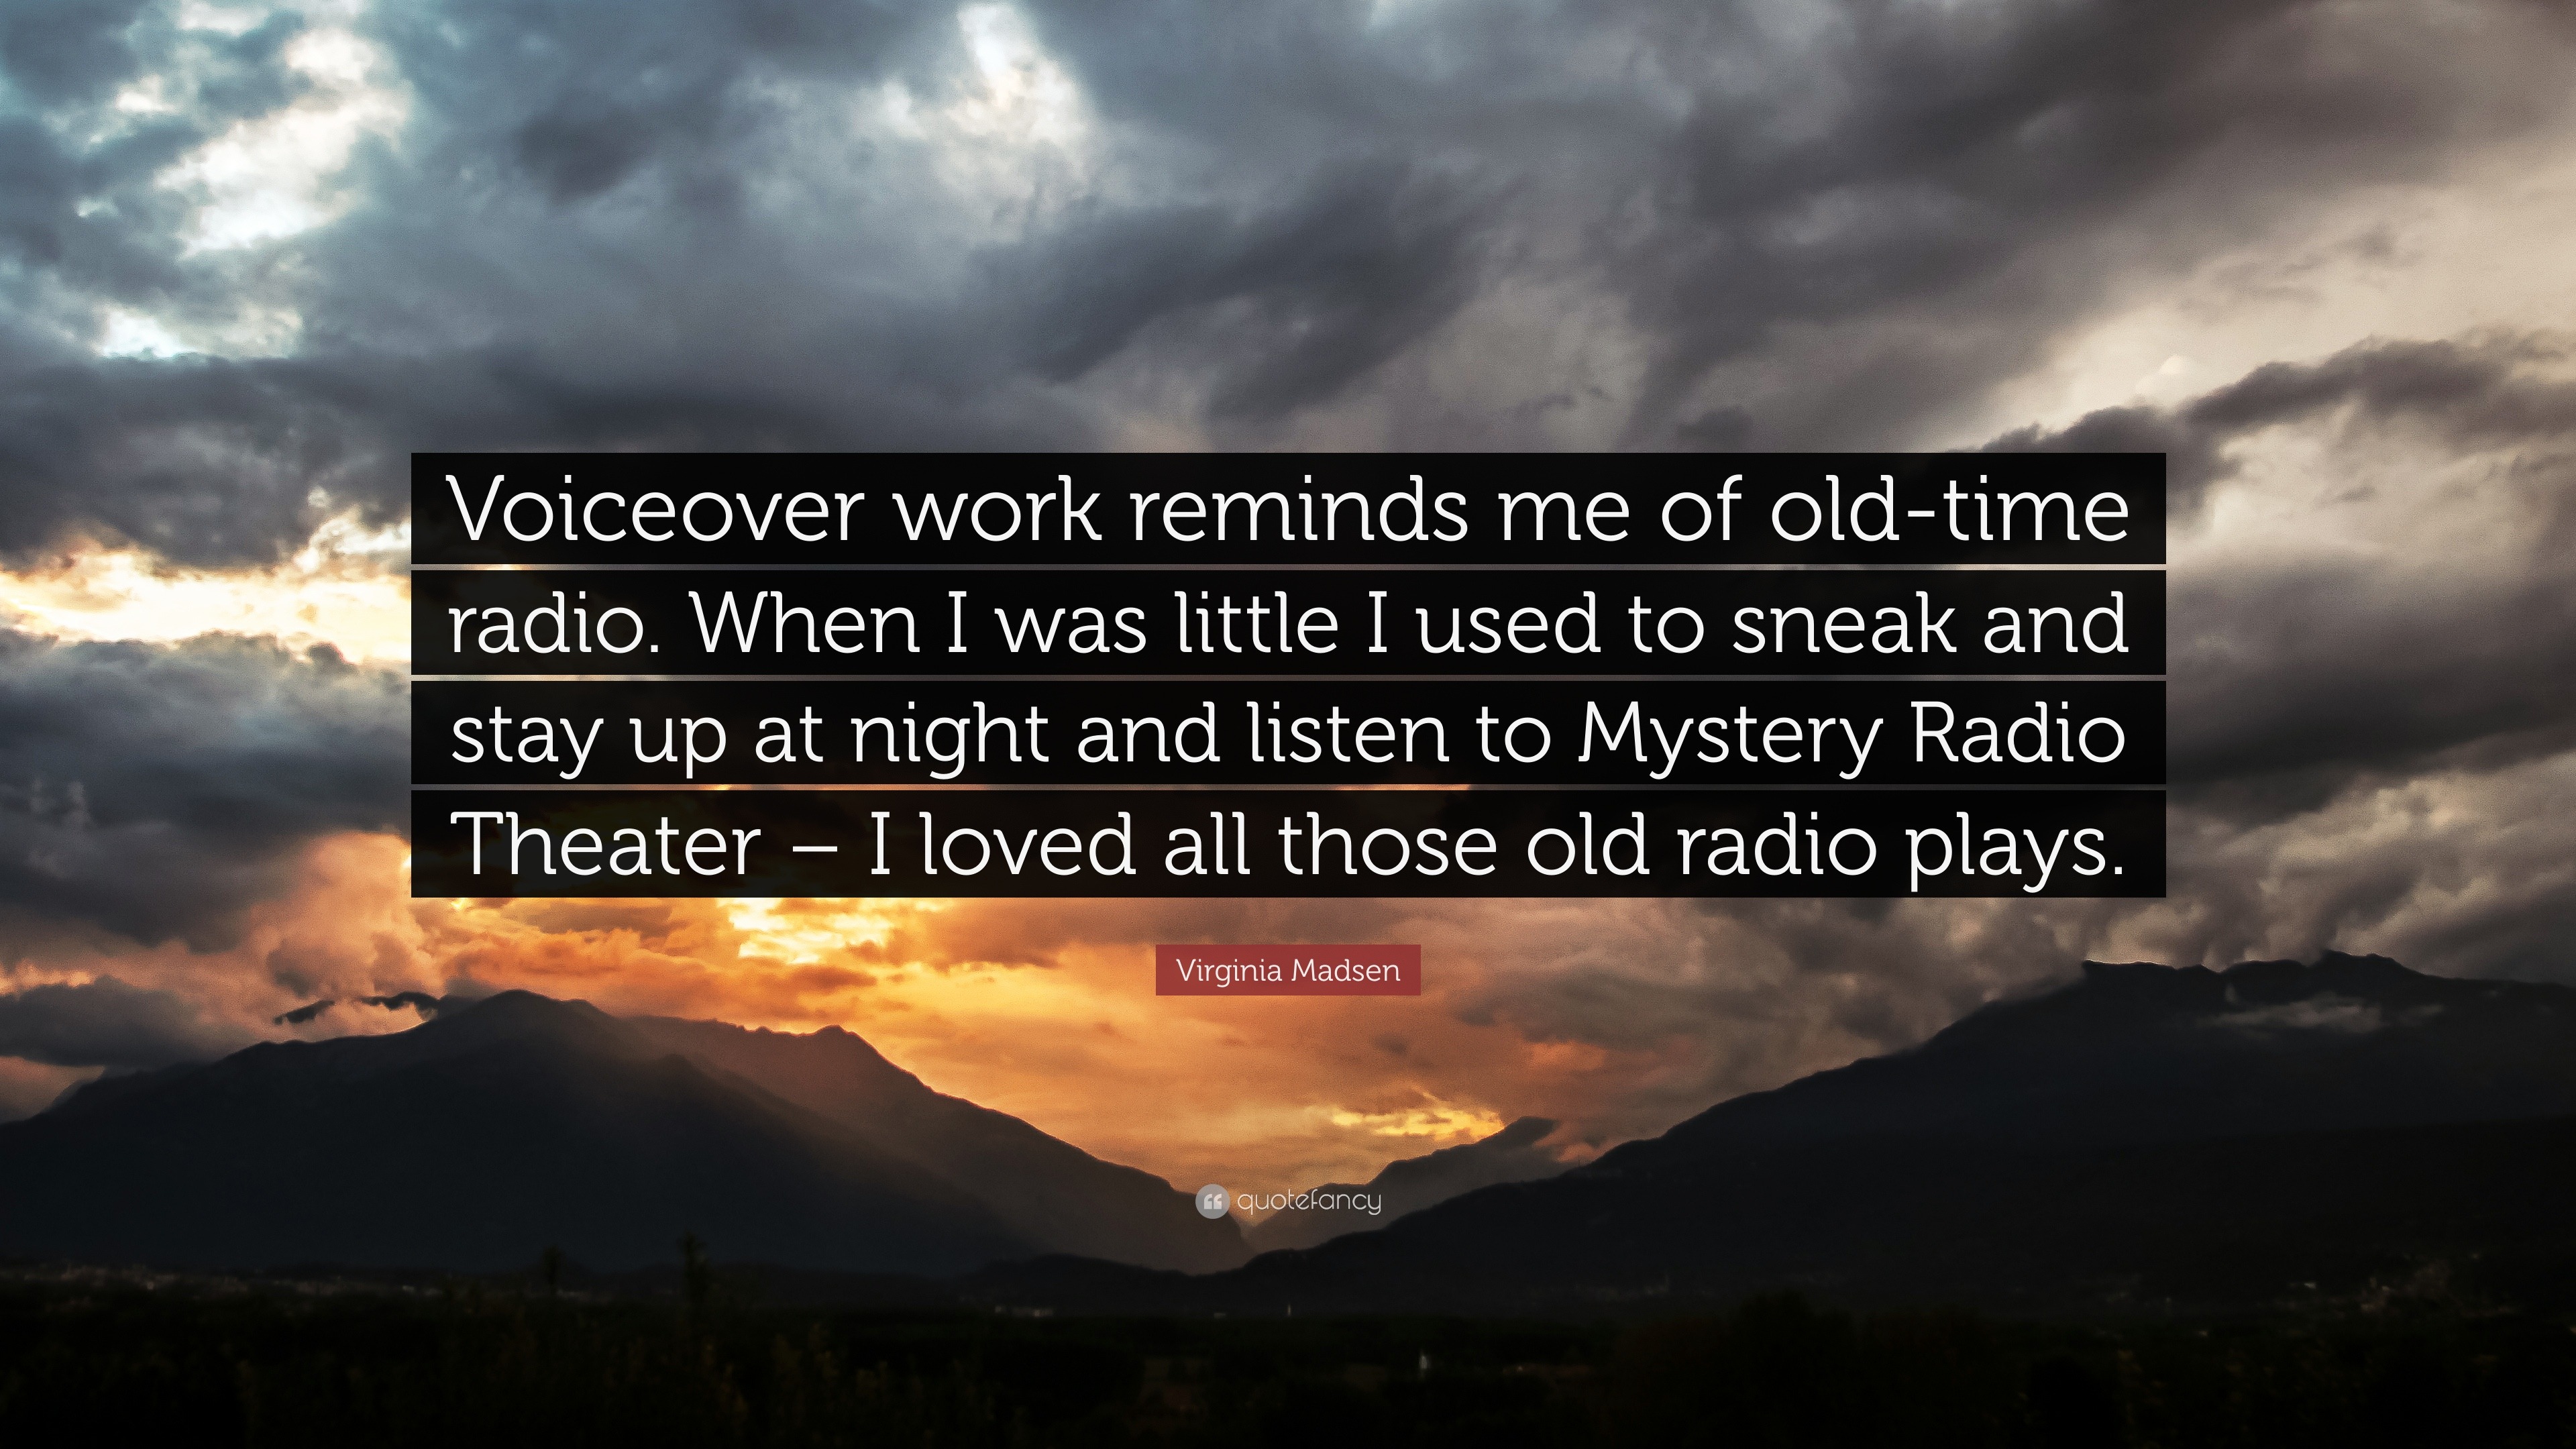 Virginia Madsen Quote: work reminds of old-time radio. When I was little I used to sneak and stay up at night and listen to Myster...”